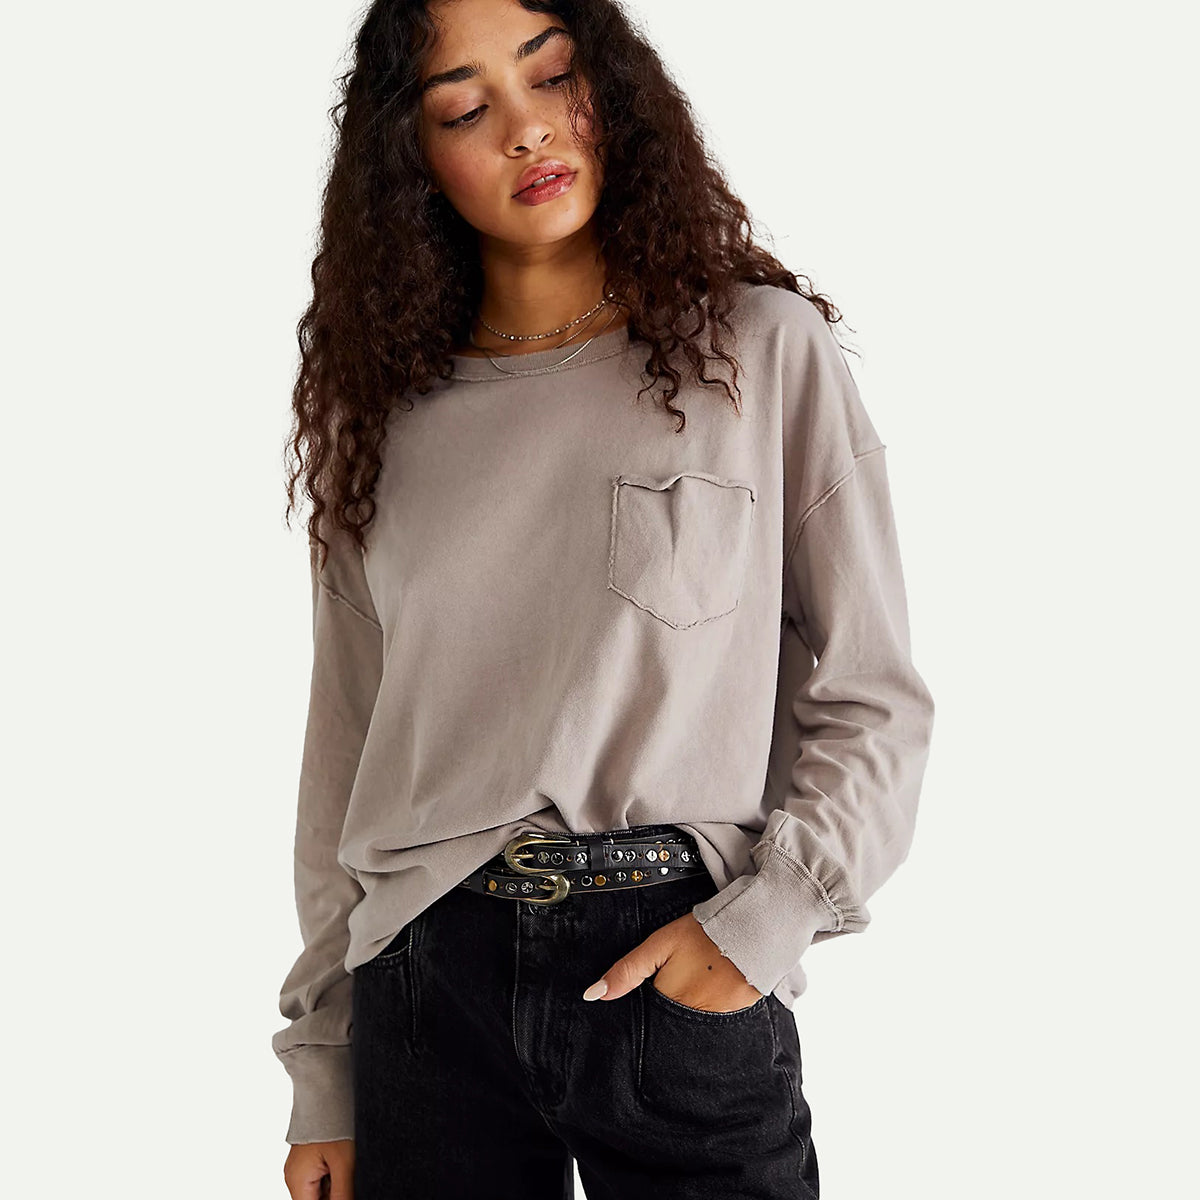 Echt - Our women's Reckless Cropped Tee will not disappoint